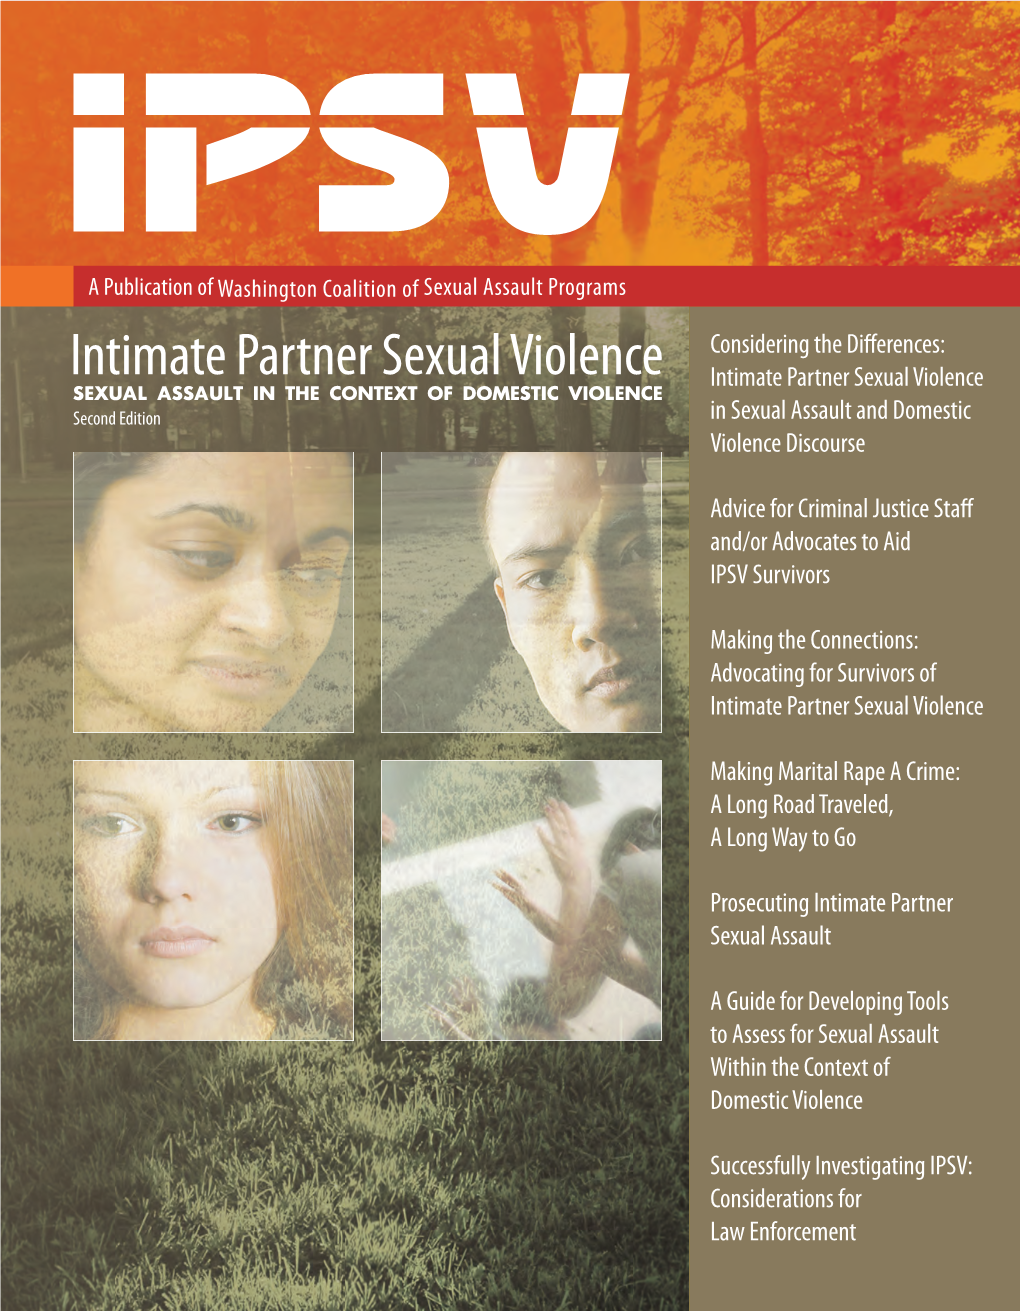 Intimate Partner Sexual Violence (IPSV) and the Range of Issues It Carries As Distinct from General Sexual Assault Or Domestic Violence, Was Not Well-Defined